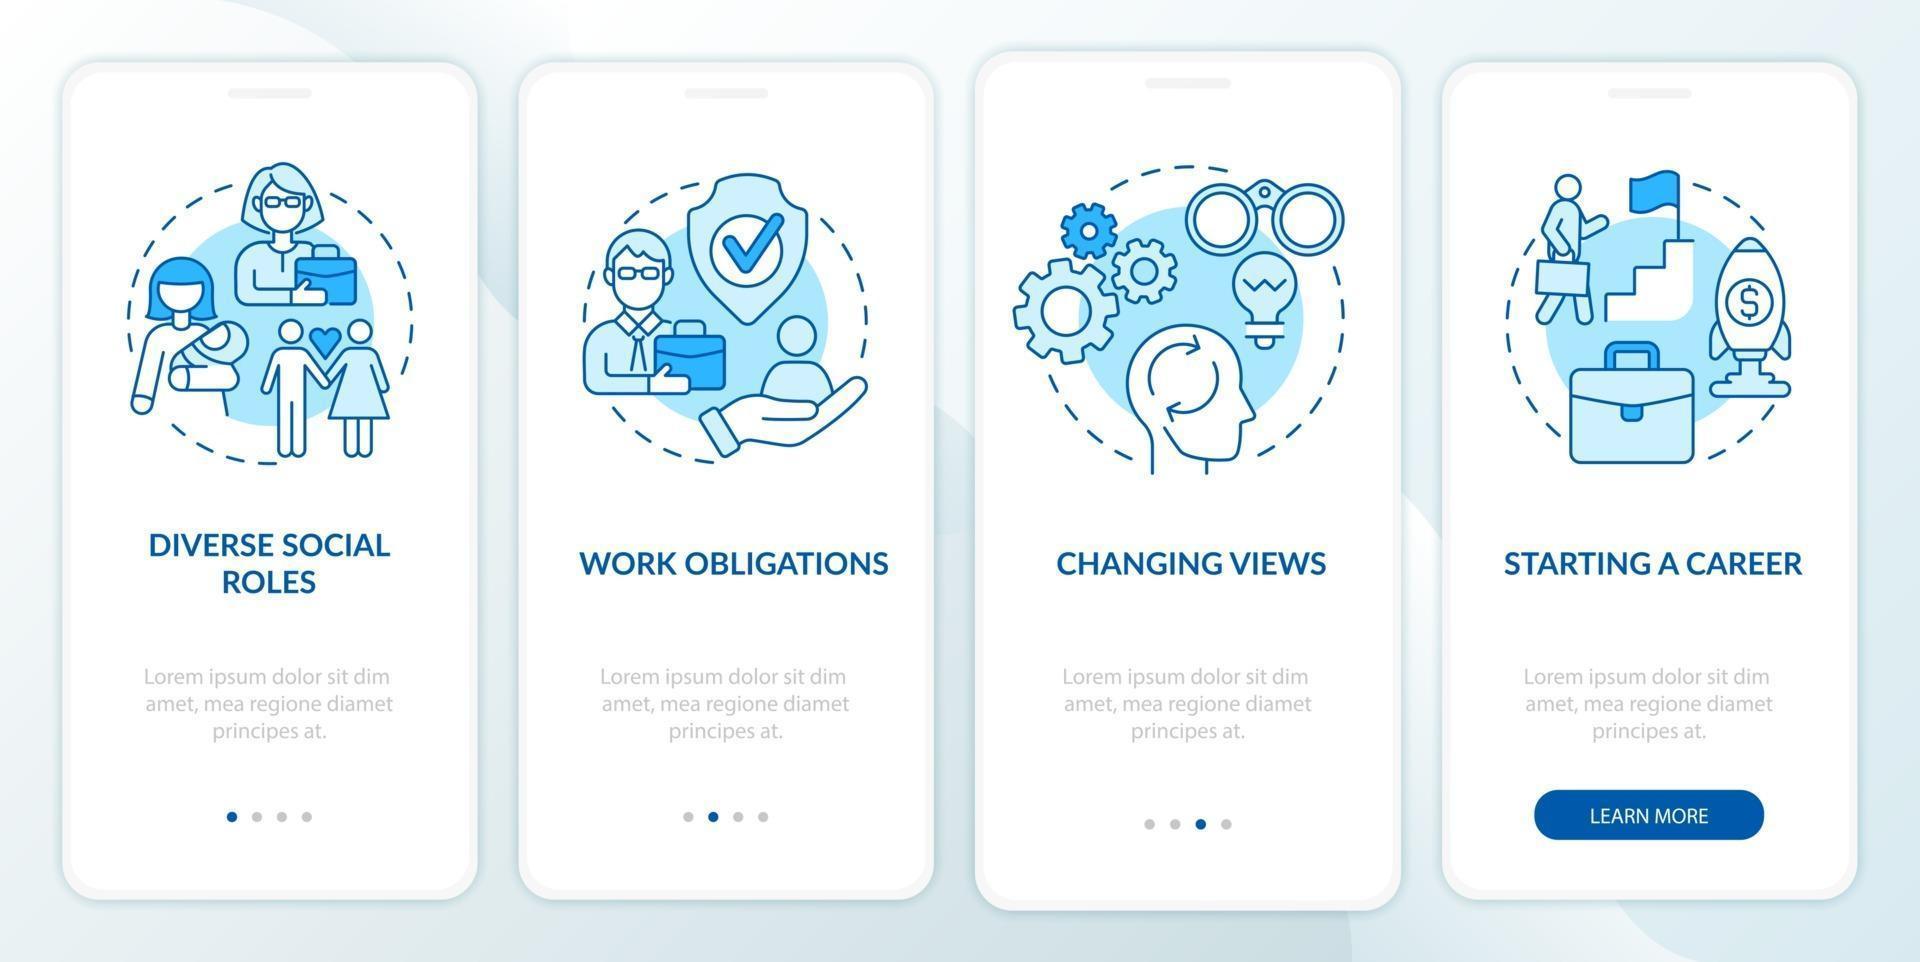 Starting a career onboarding mobile app page screen vector